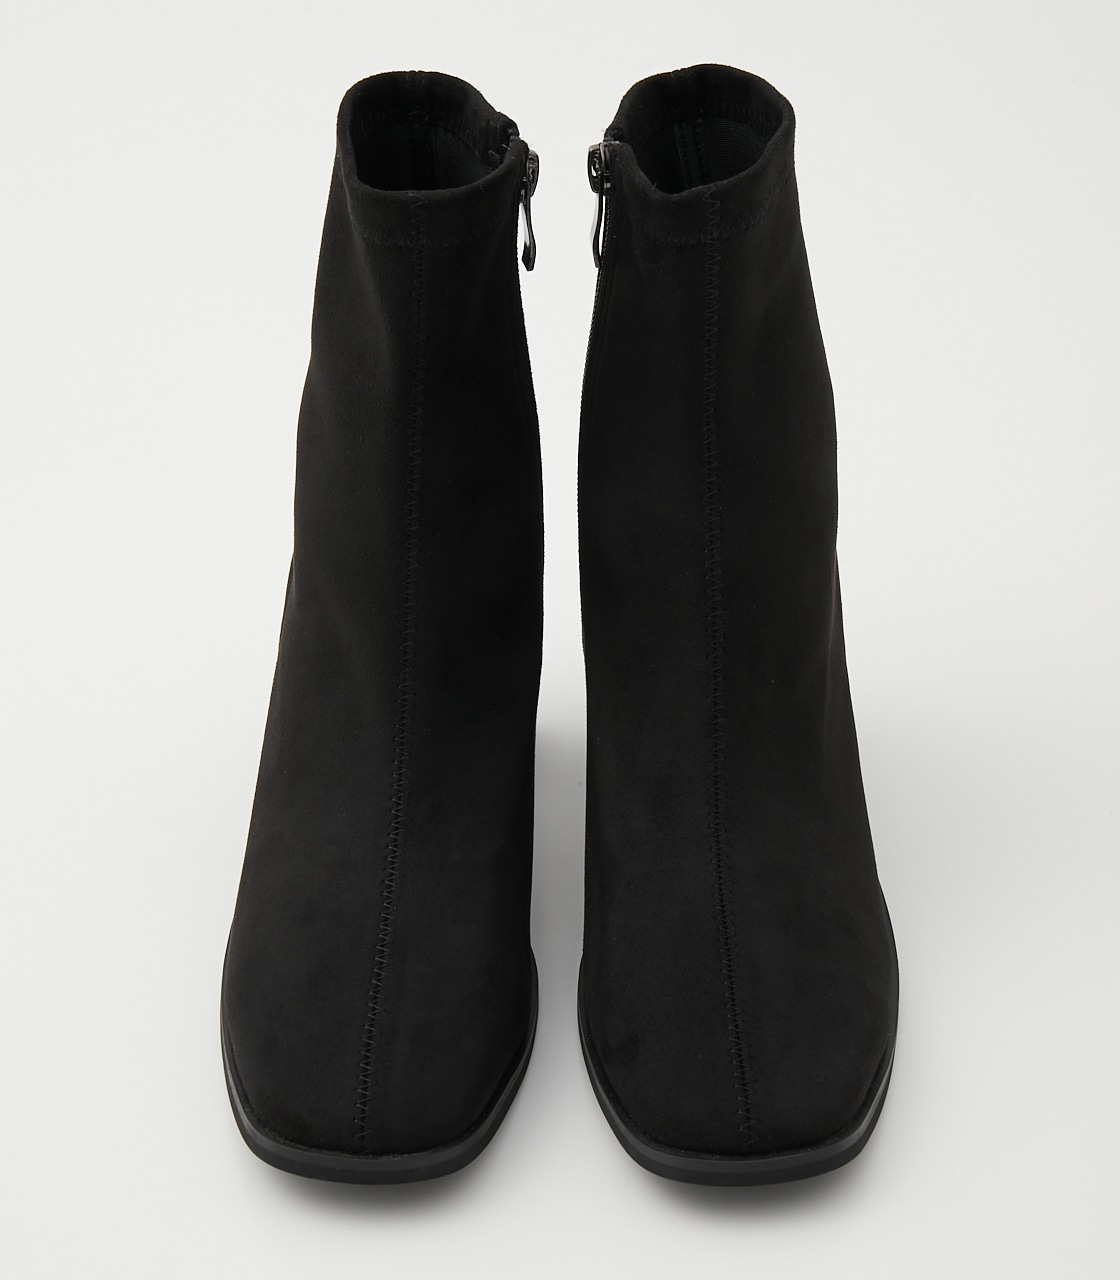 SUEDE SHORT BOOTS/スエードショートブーツ 詳細画像 BLK 3